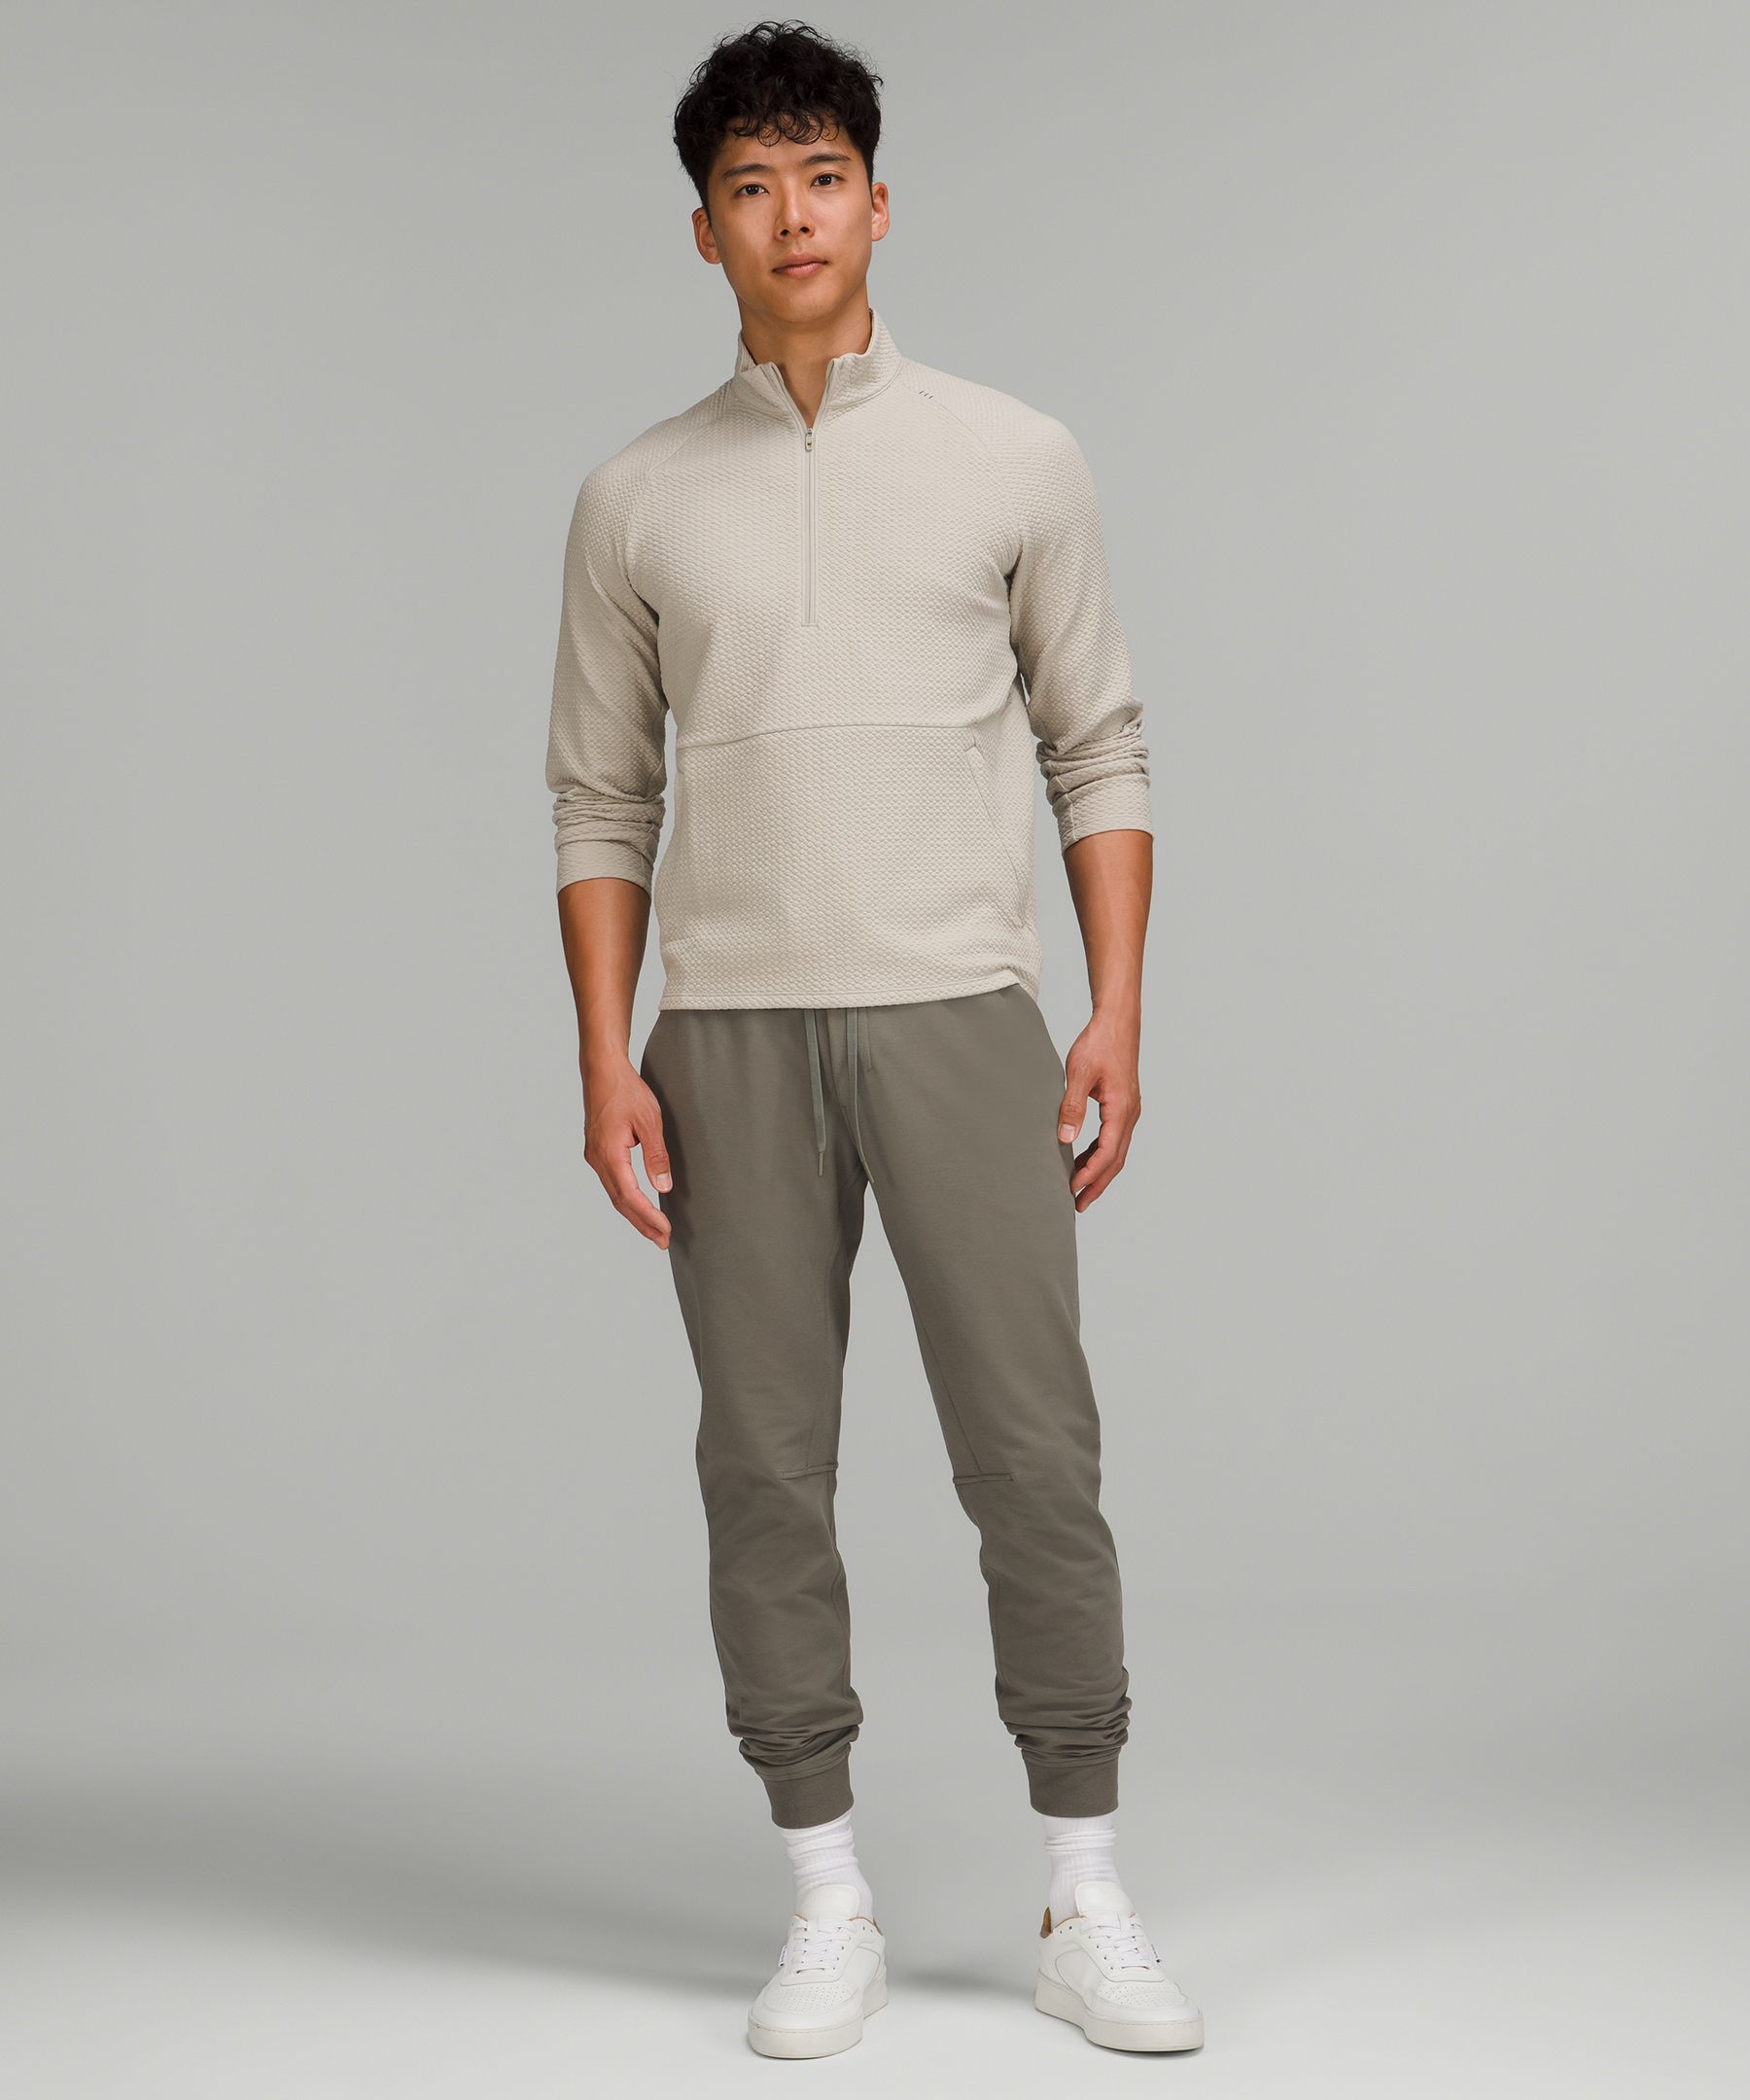 Shoppers are obsessed with these $138 Lululemon joggers for men